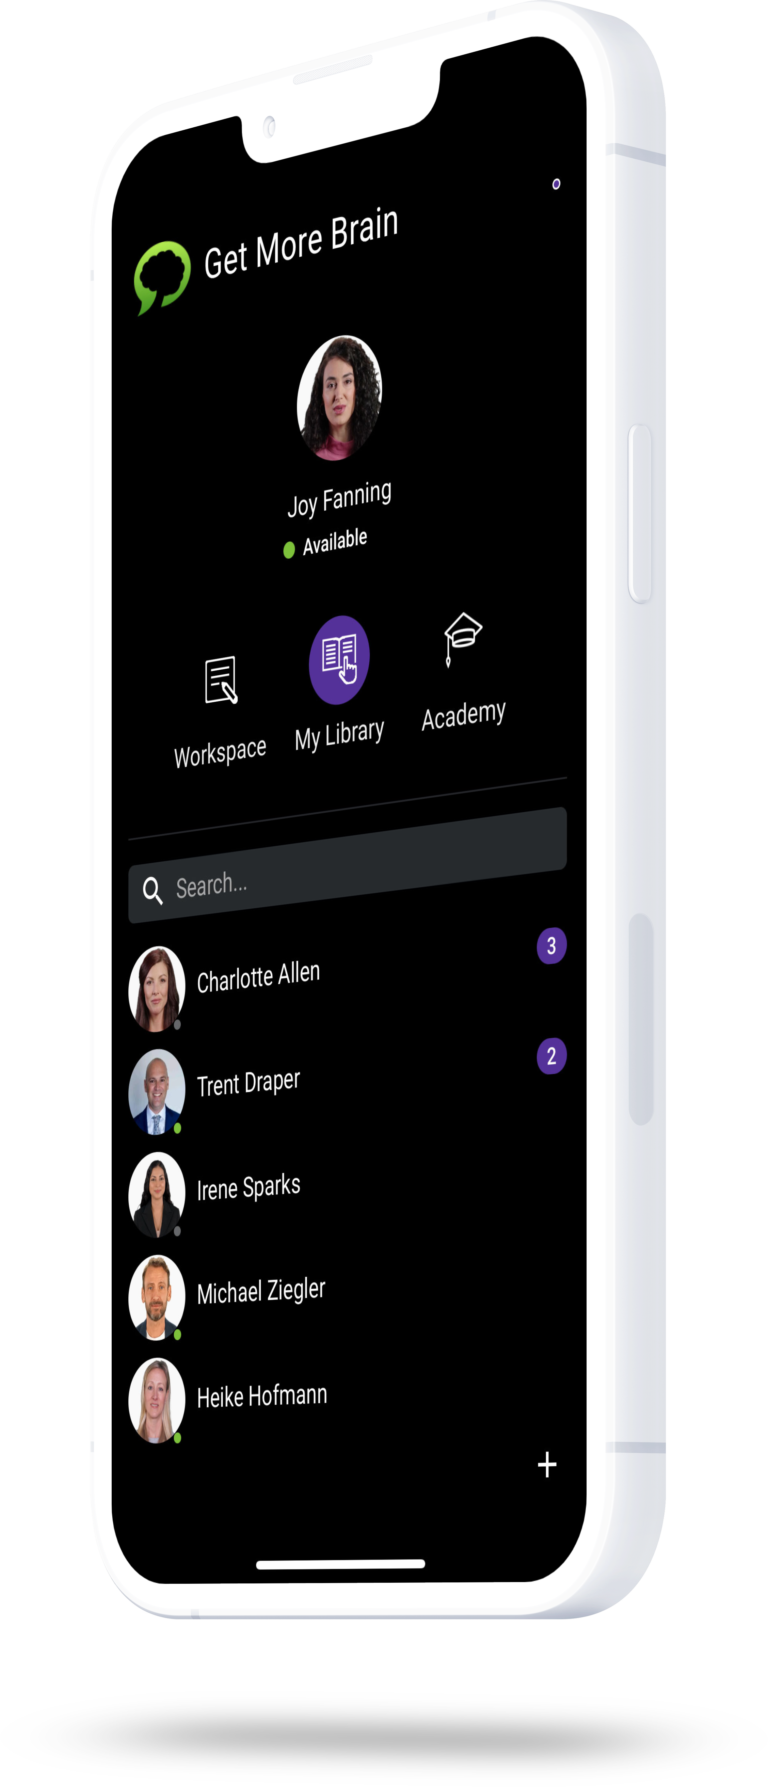 the image shows a smartphone-mockup of Get More Brain, our platform to create engaging upskilling-environments: personal dashboard with messenger, workspace, library and academy.